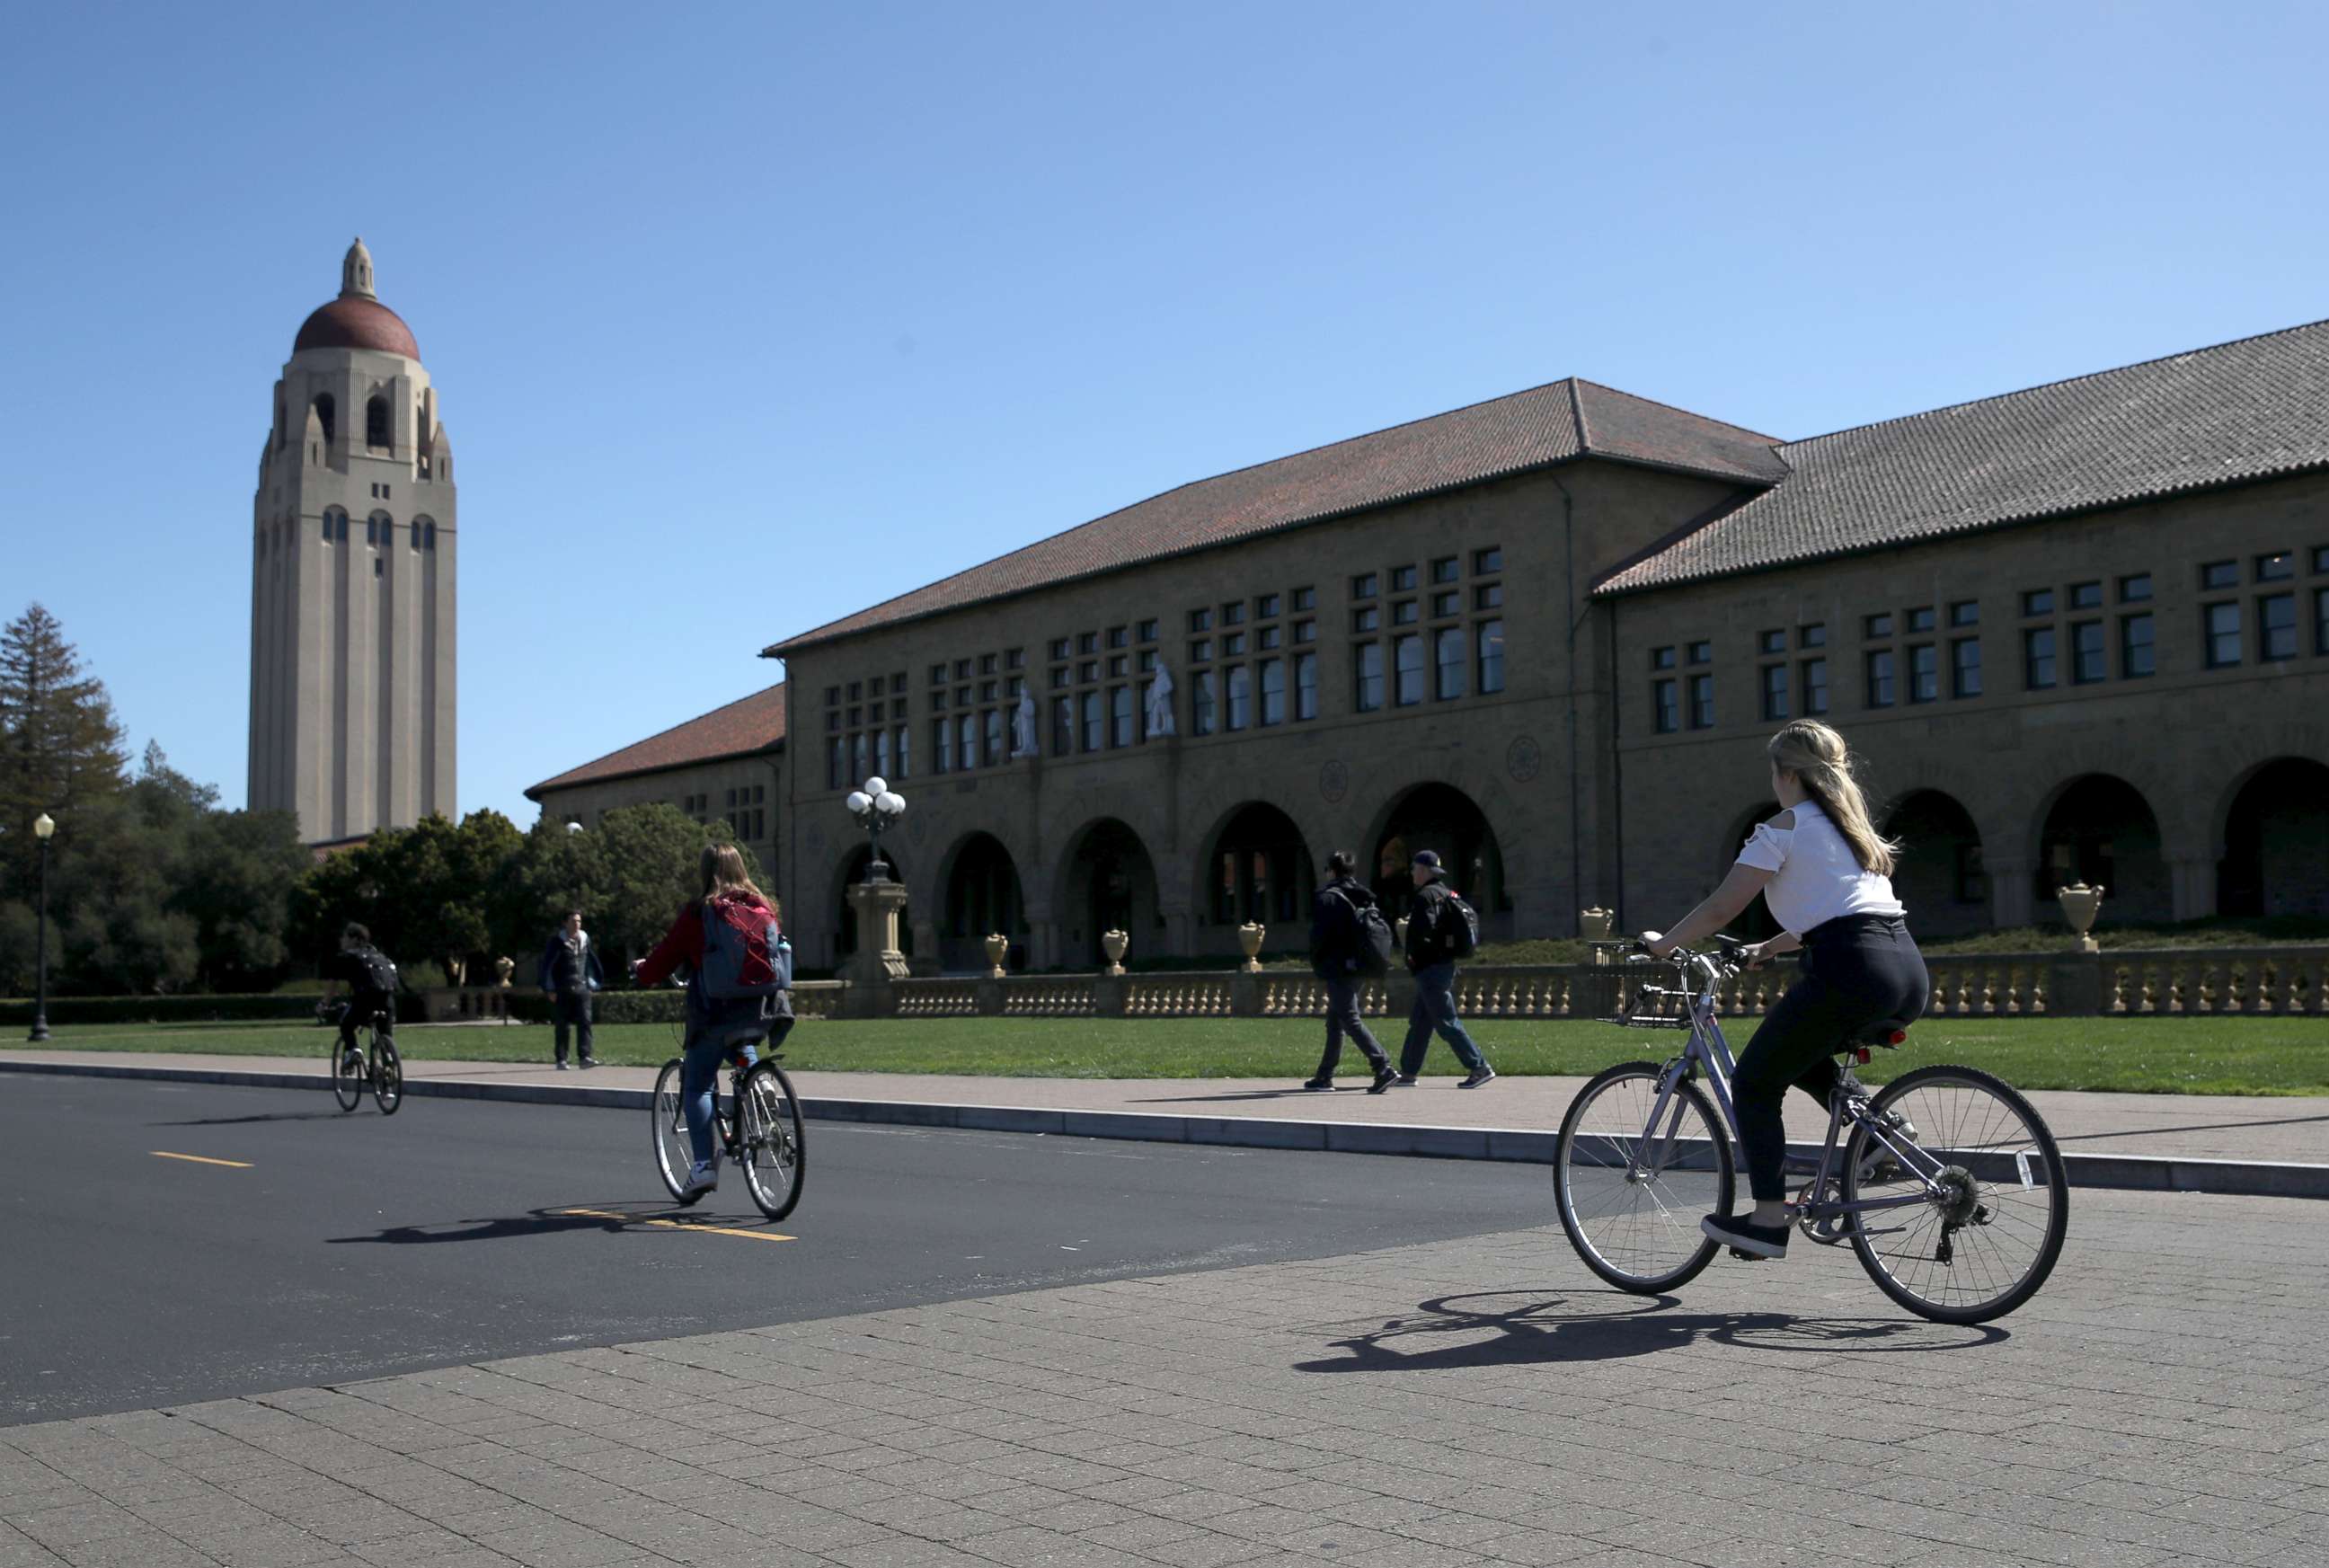 PHOTO: Cyclists ride by Hoover Tower on the Stanford University campus on March 12, 2019 in Stanford, California.